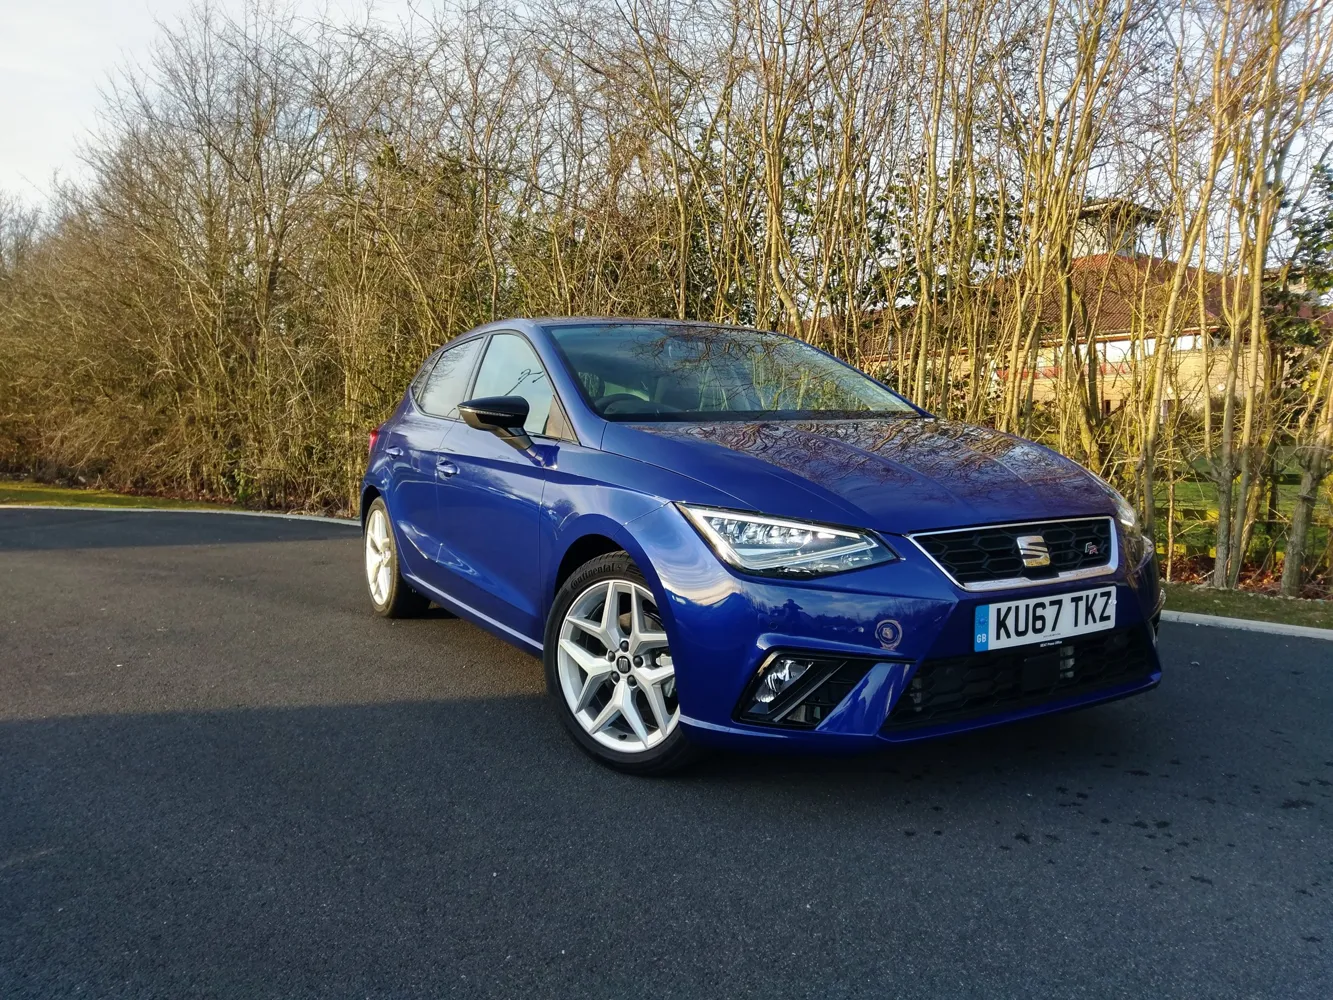 Seat Ibiza FR Photos and Specs. Photo: Seat Ibiza FR Specifications and 26  perfect photos of Seat Ibiza FR